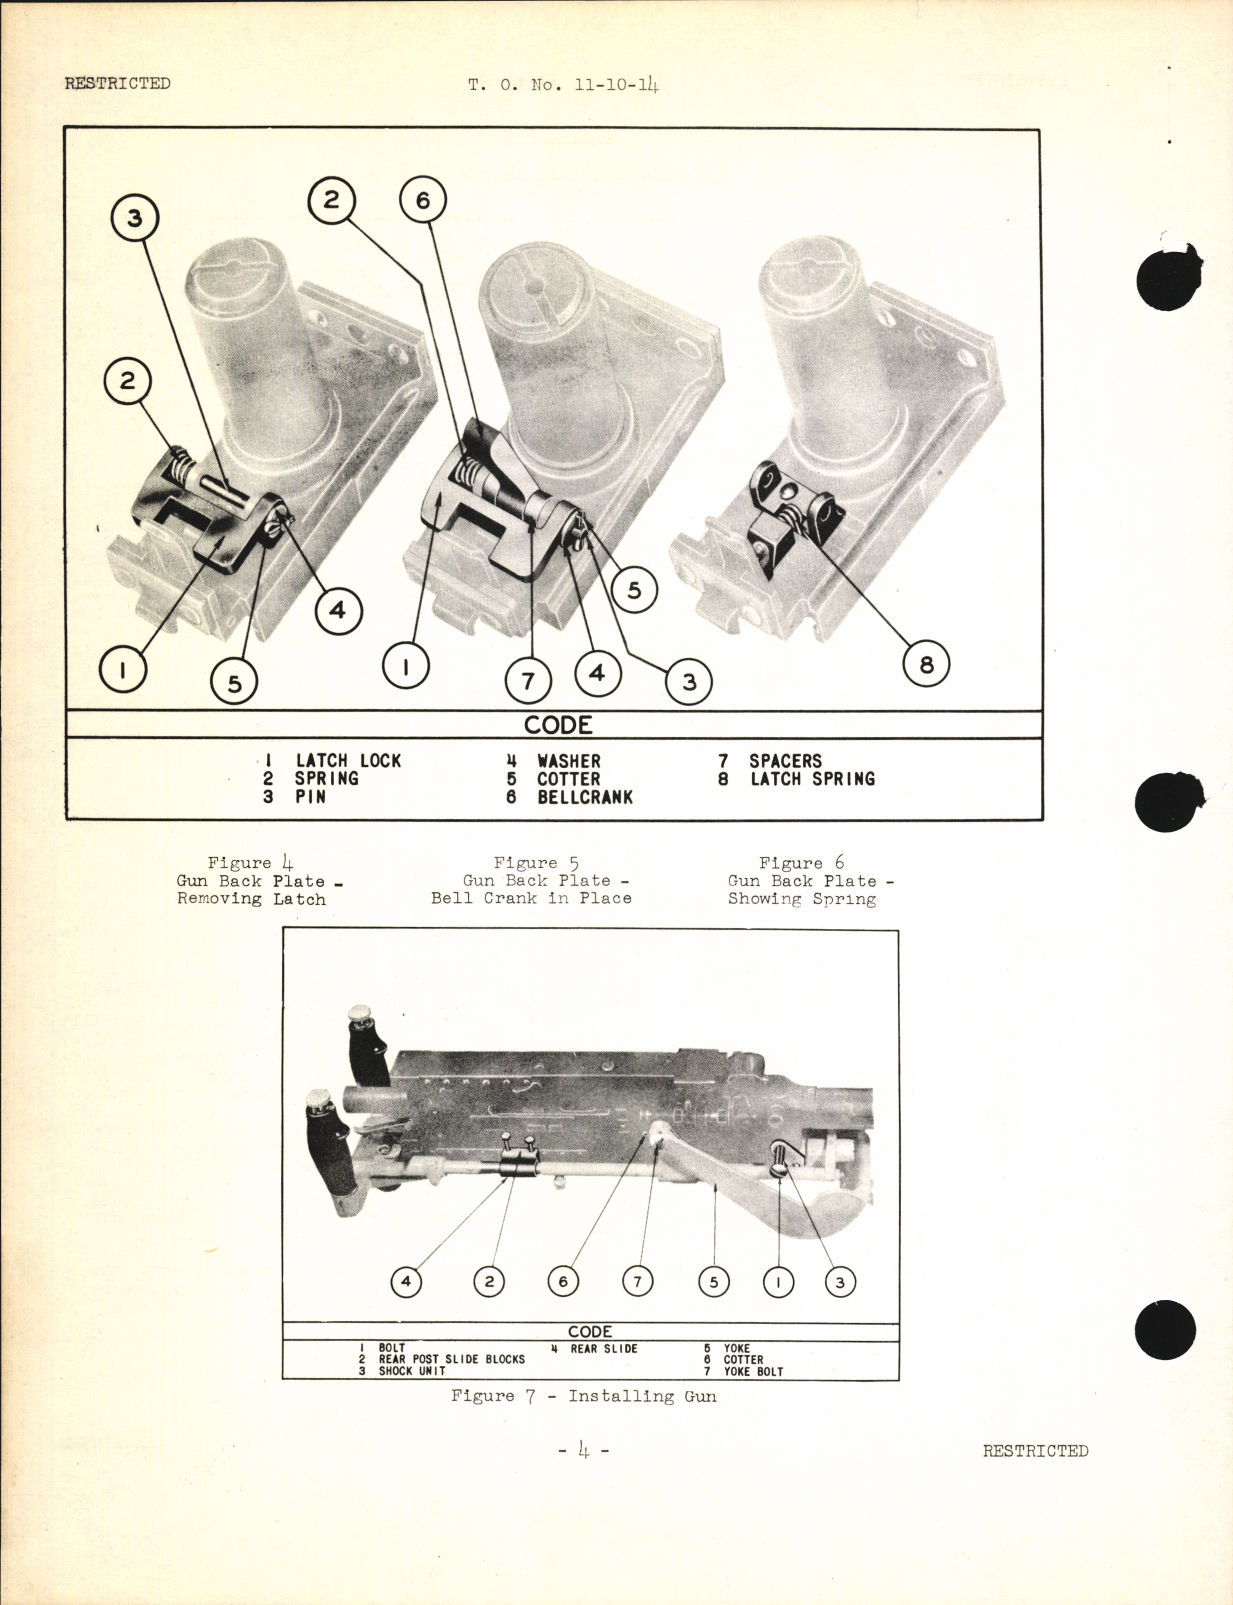 Sample page 8 from AirCorps Library document: Handbook of Instructions with Parts Catalog for Type C-16 Single Gun Mount Adapter